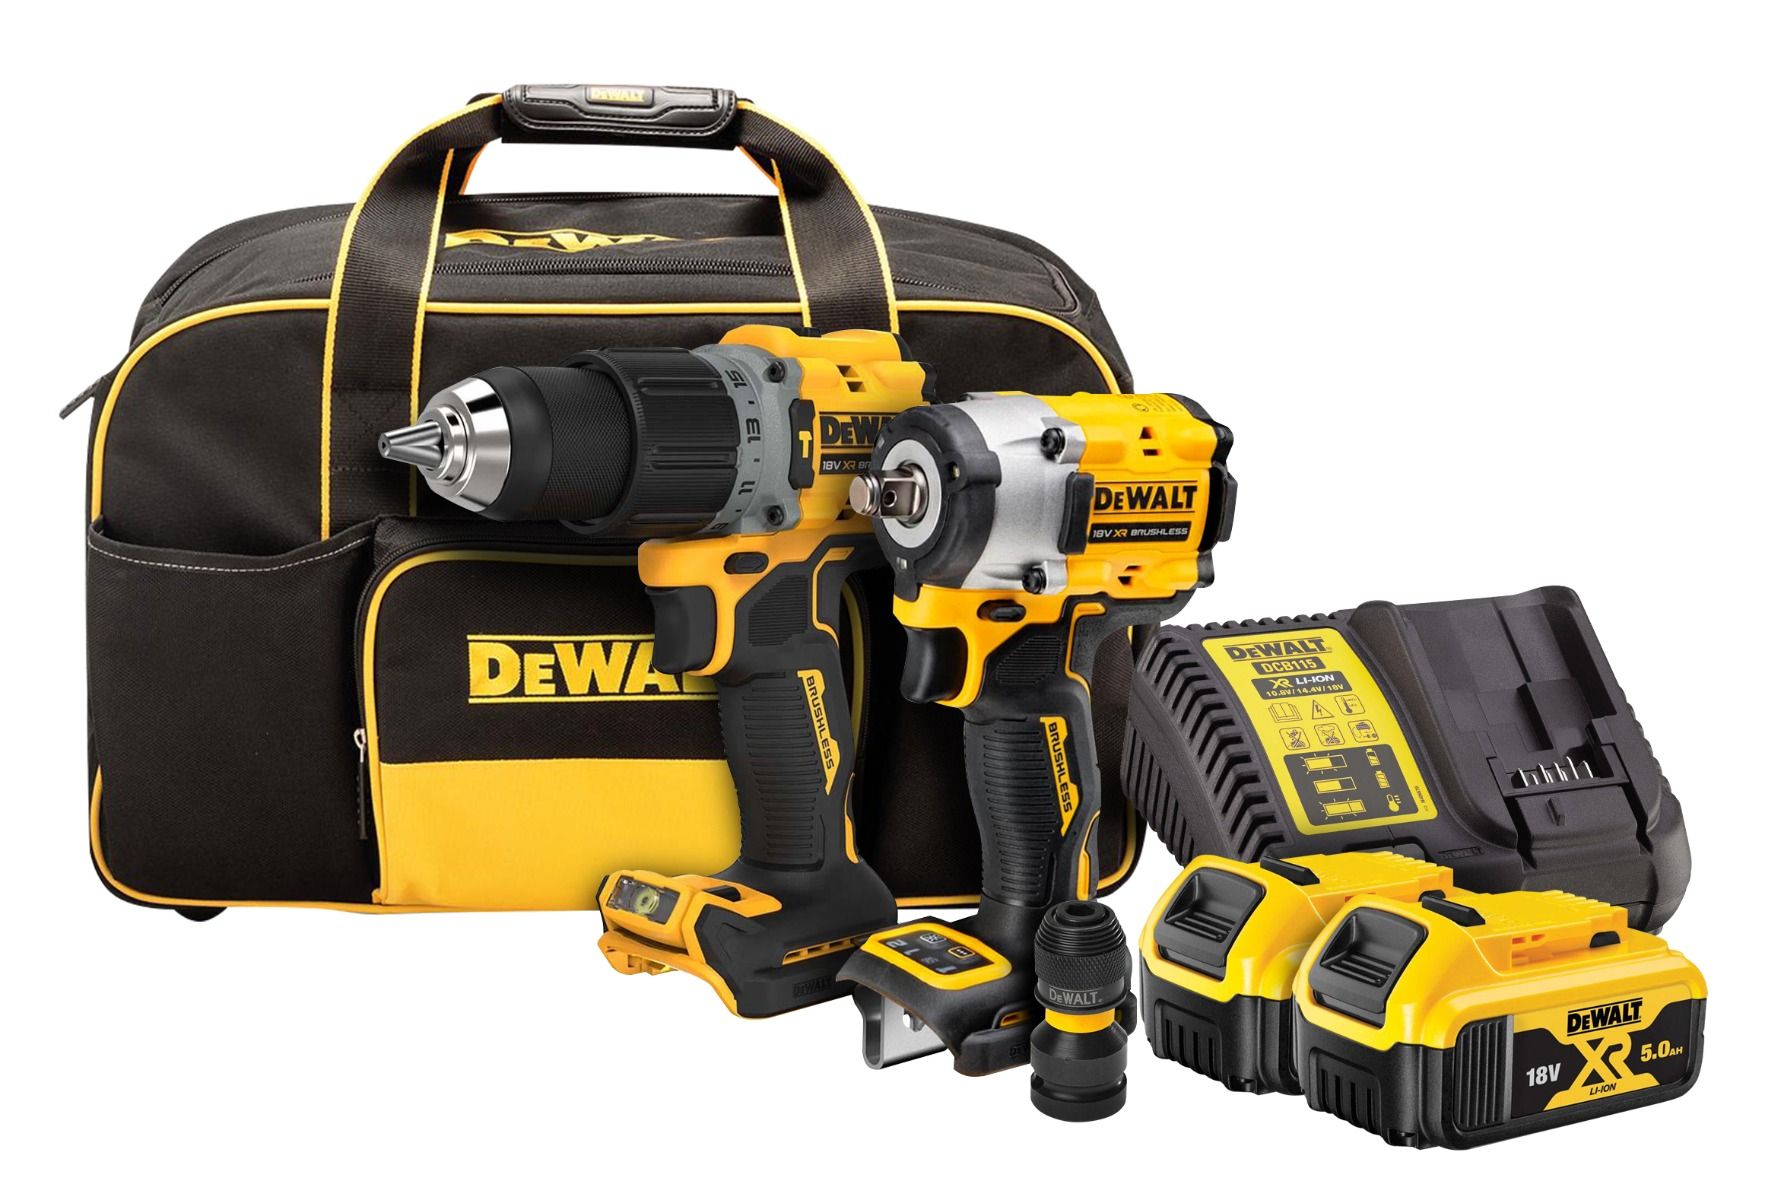 18V 5.0Ah 2Pce Brushless Hammer Drill + Impact Wrench Kit DCZ294P2-XE by Dewalt